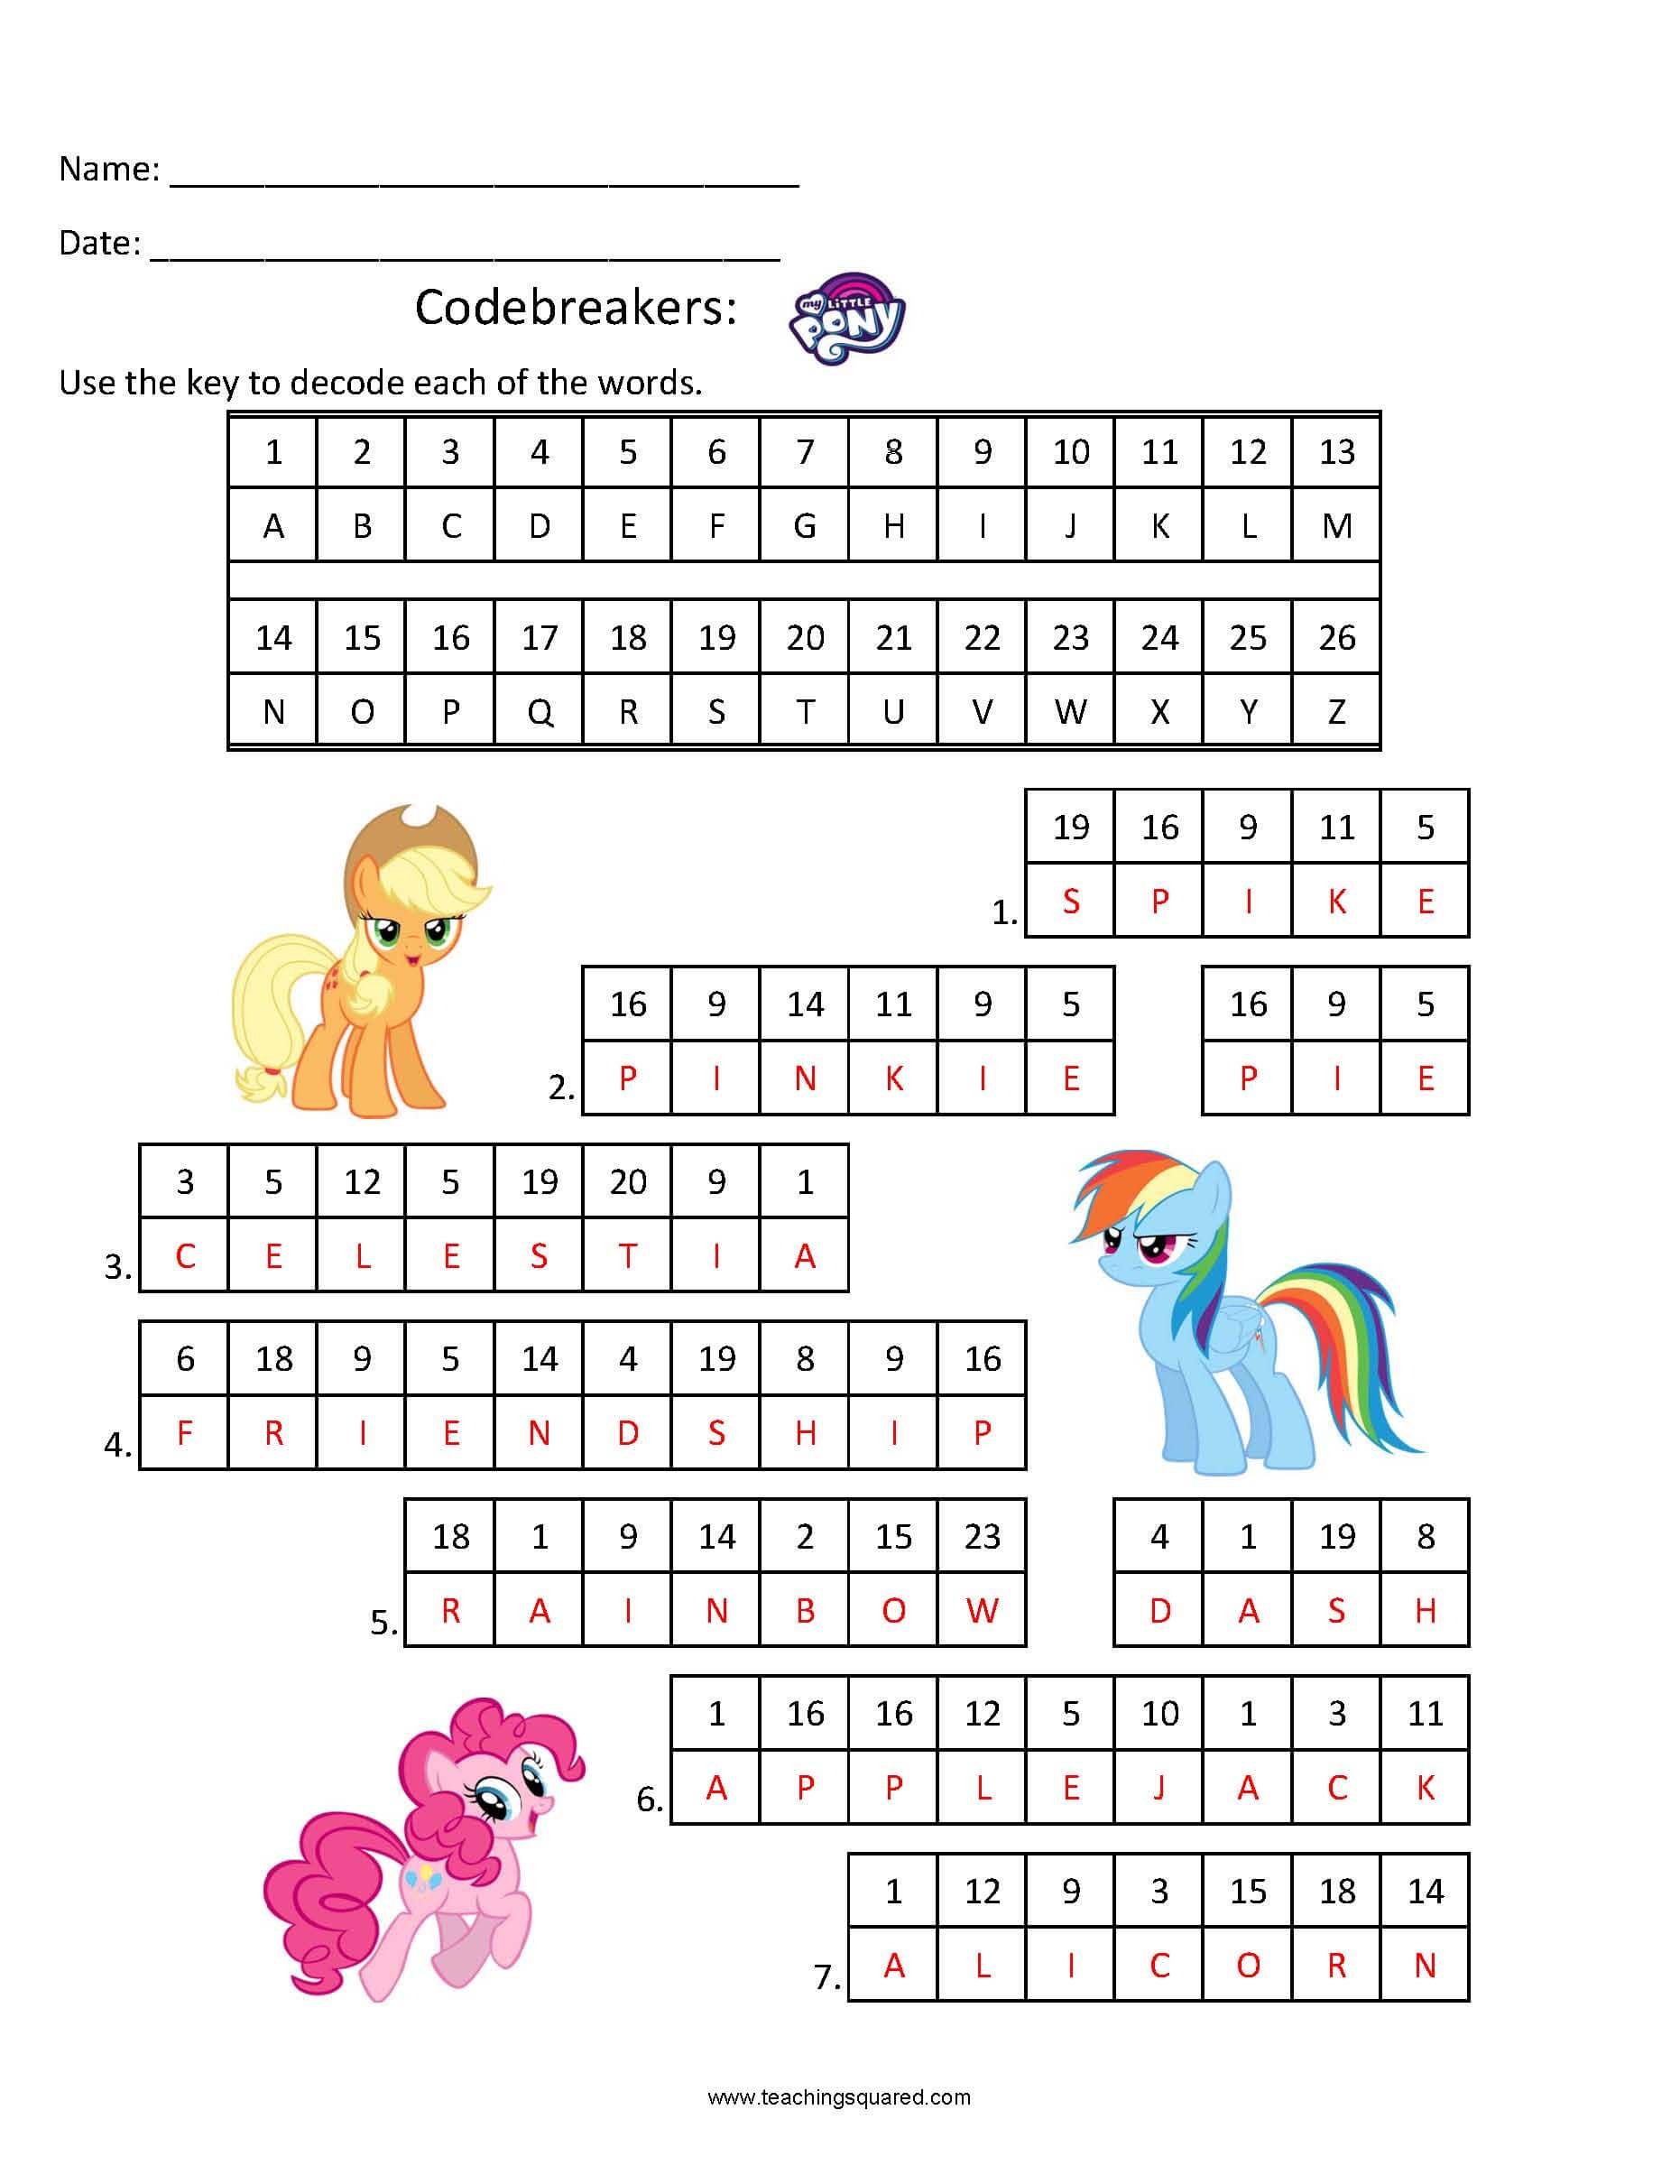 Codebreakers- My Little Pony Fun Puzzle for kids